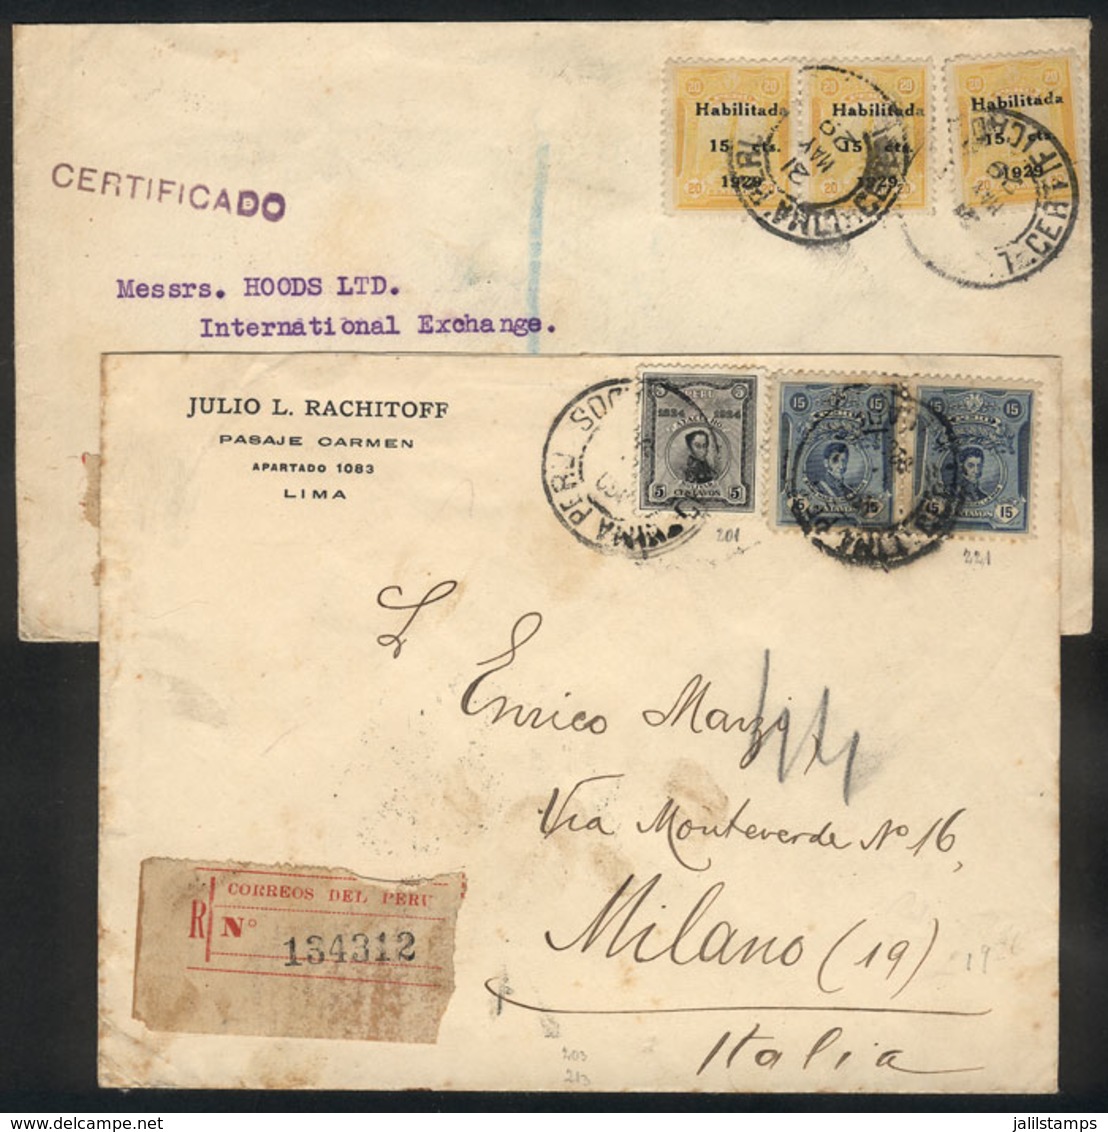 PERU: 2 Covers Sent To Italy And England In 1926 And 1929, The Former Franked With 35c. (basic Rate Of 15c. Up To 20 Gra - Peru